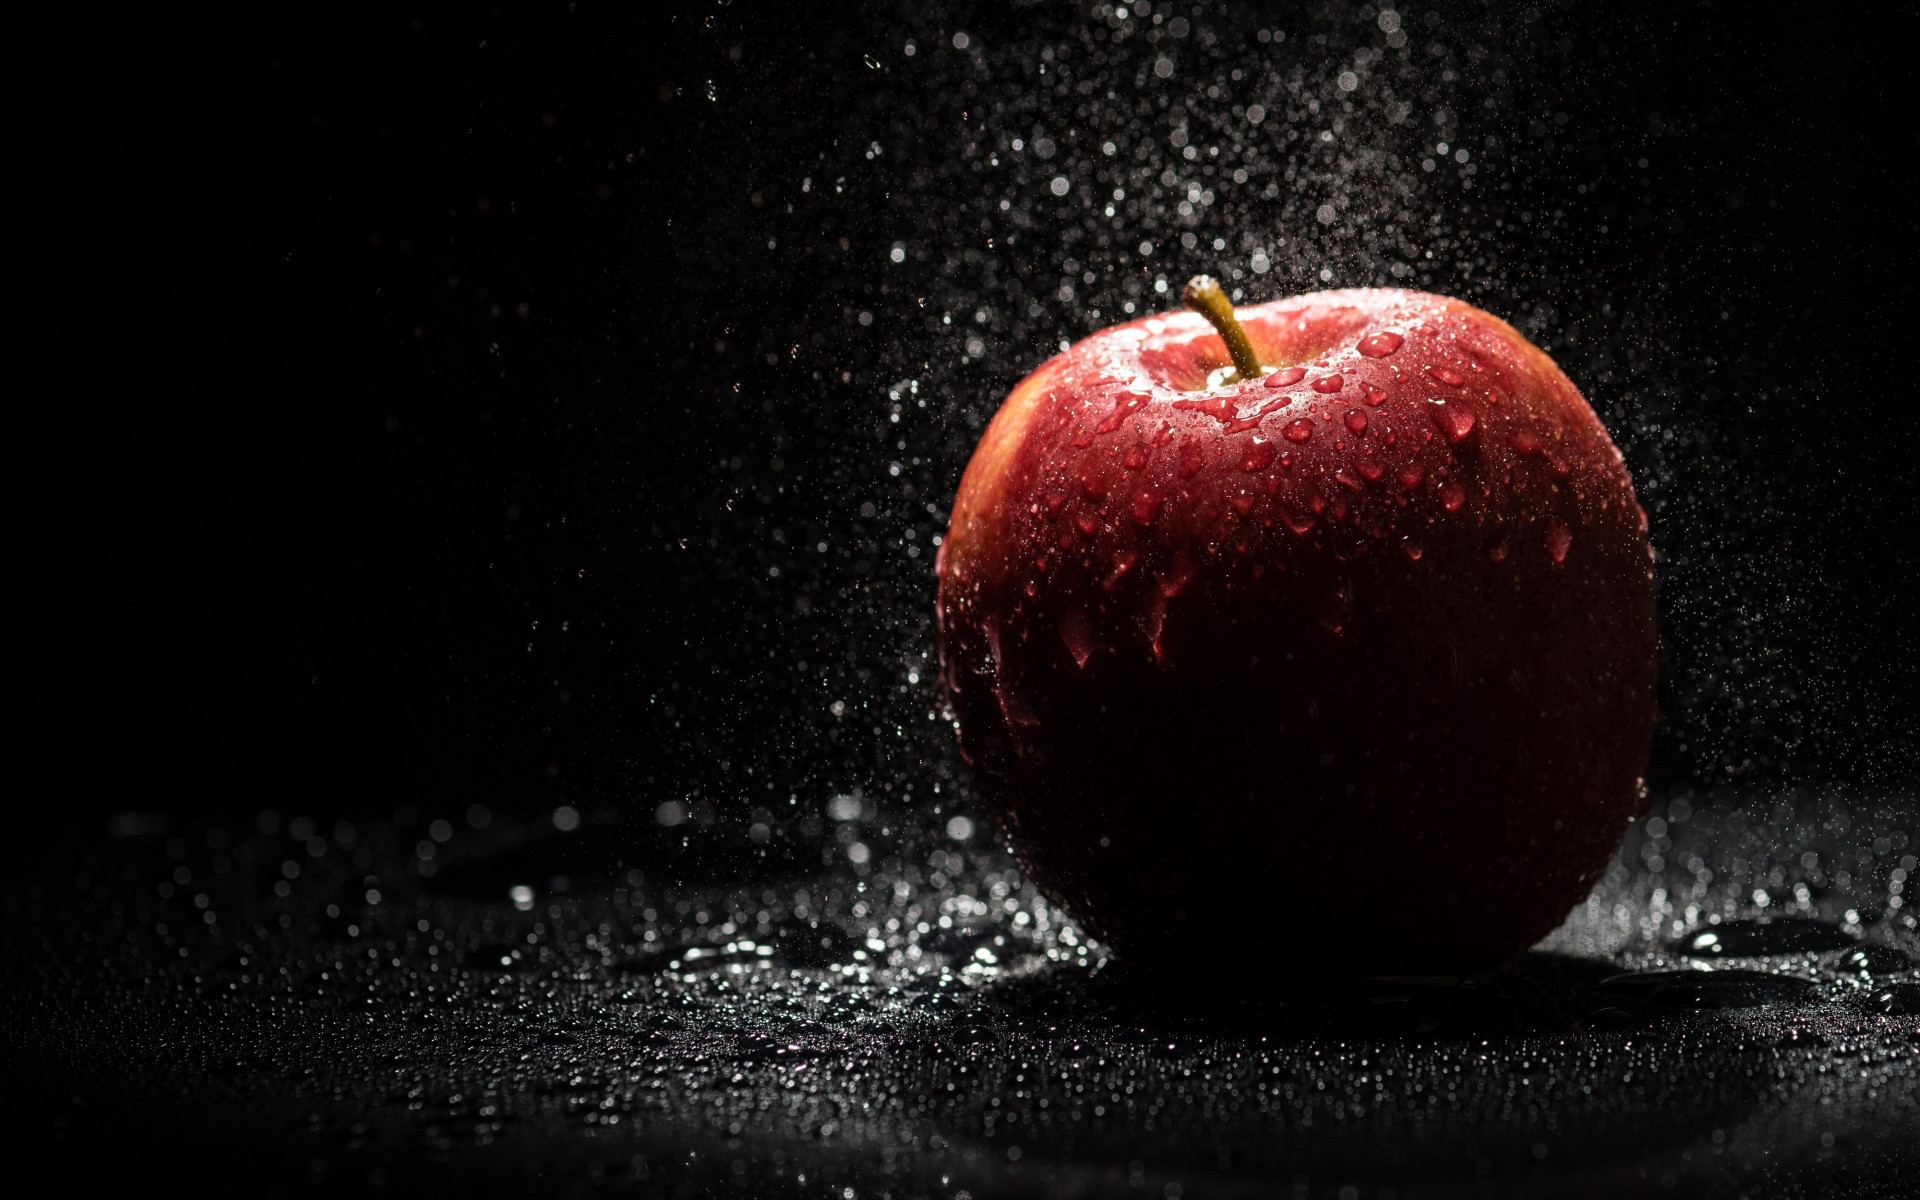 The apple, natural red apple wallpaper 1920x1200